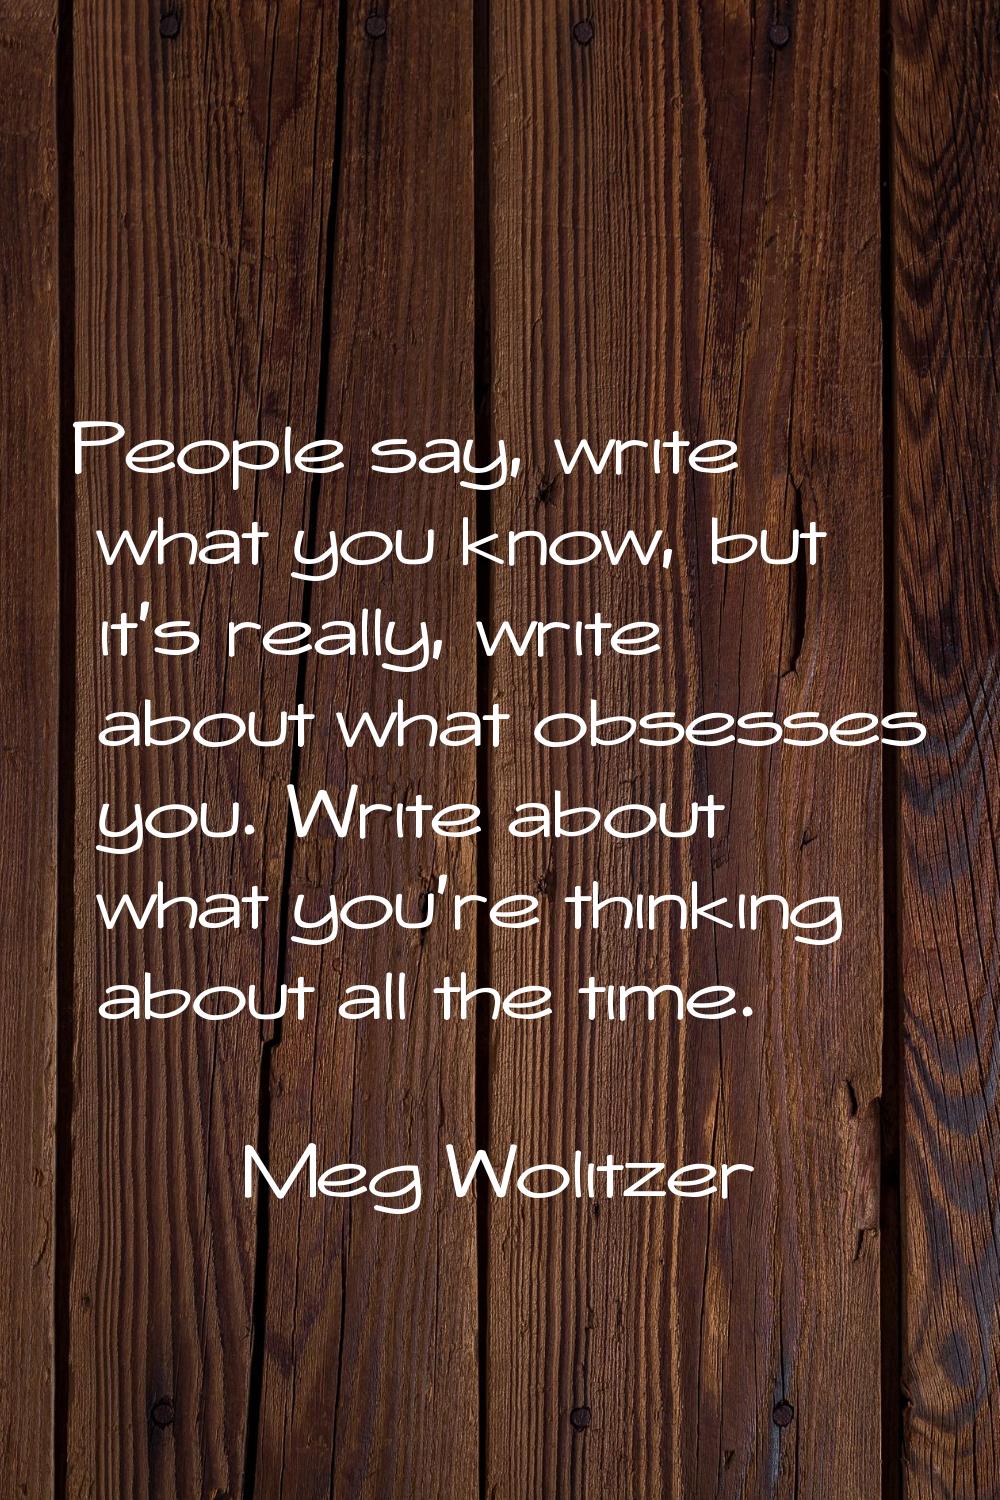 People say, write what you know, but it's really, write about what obsesses you. Write about what y